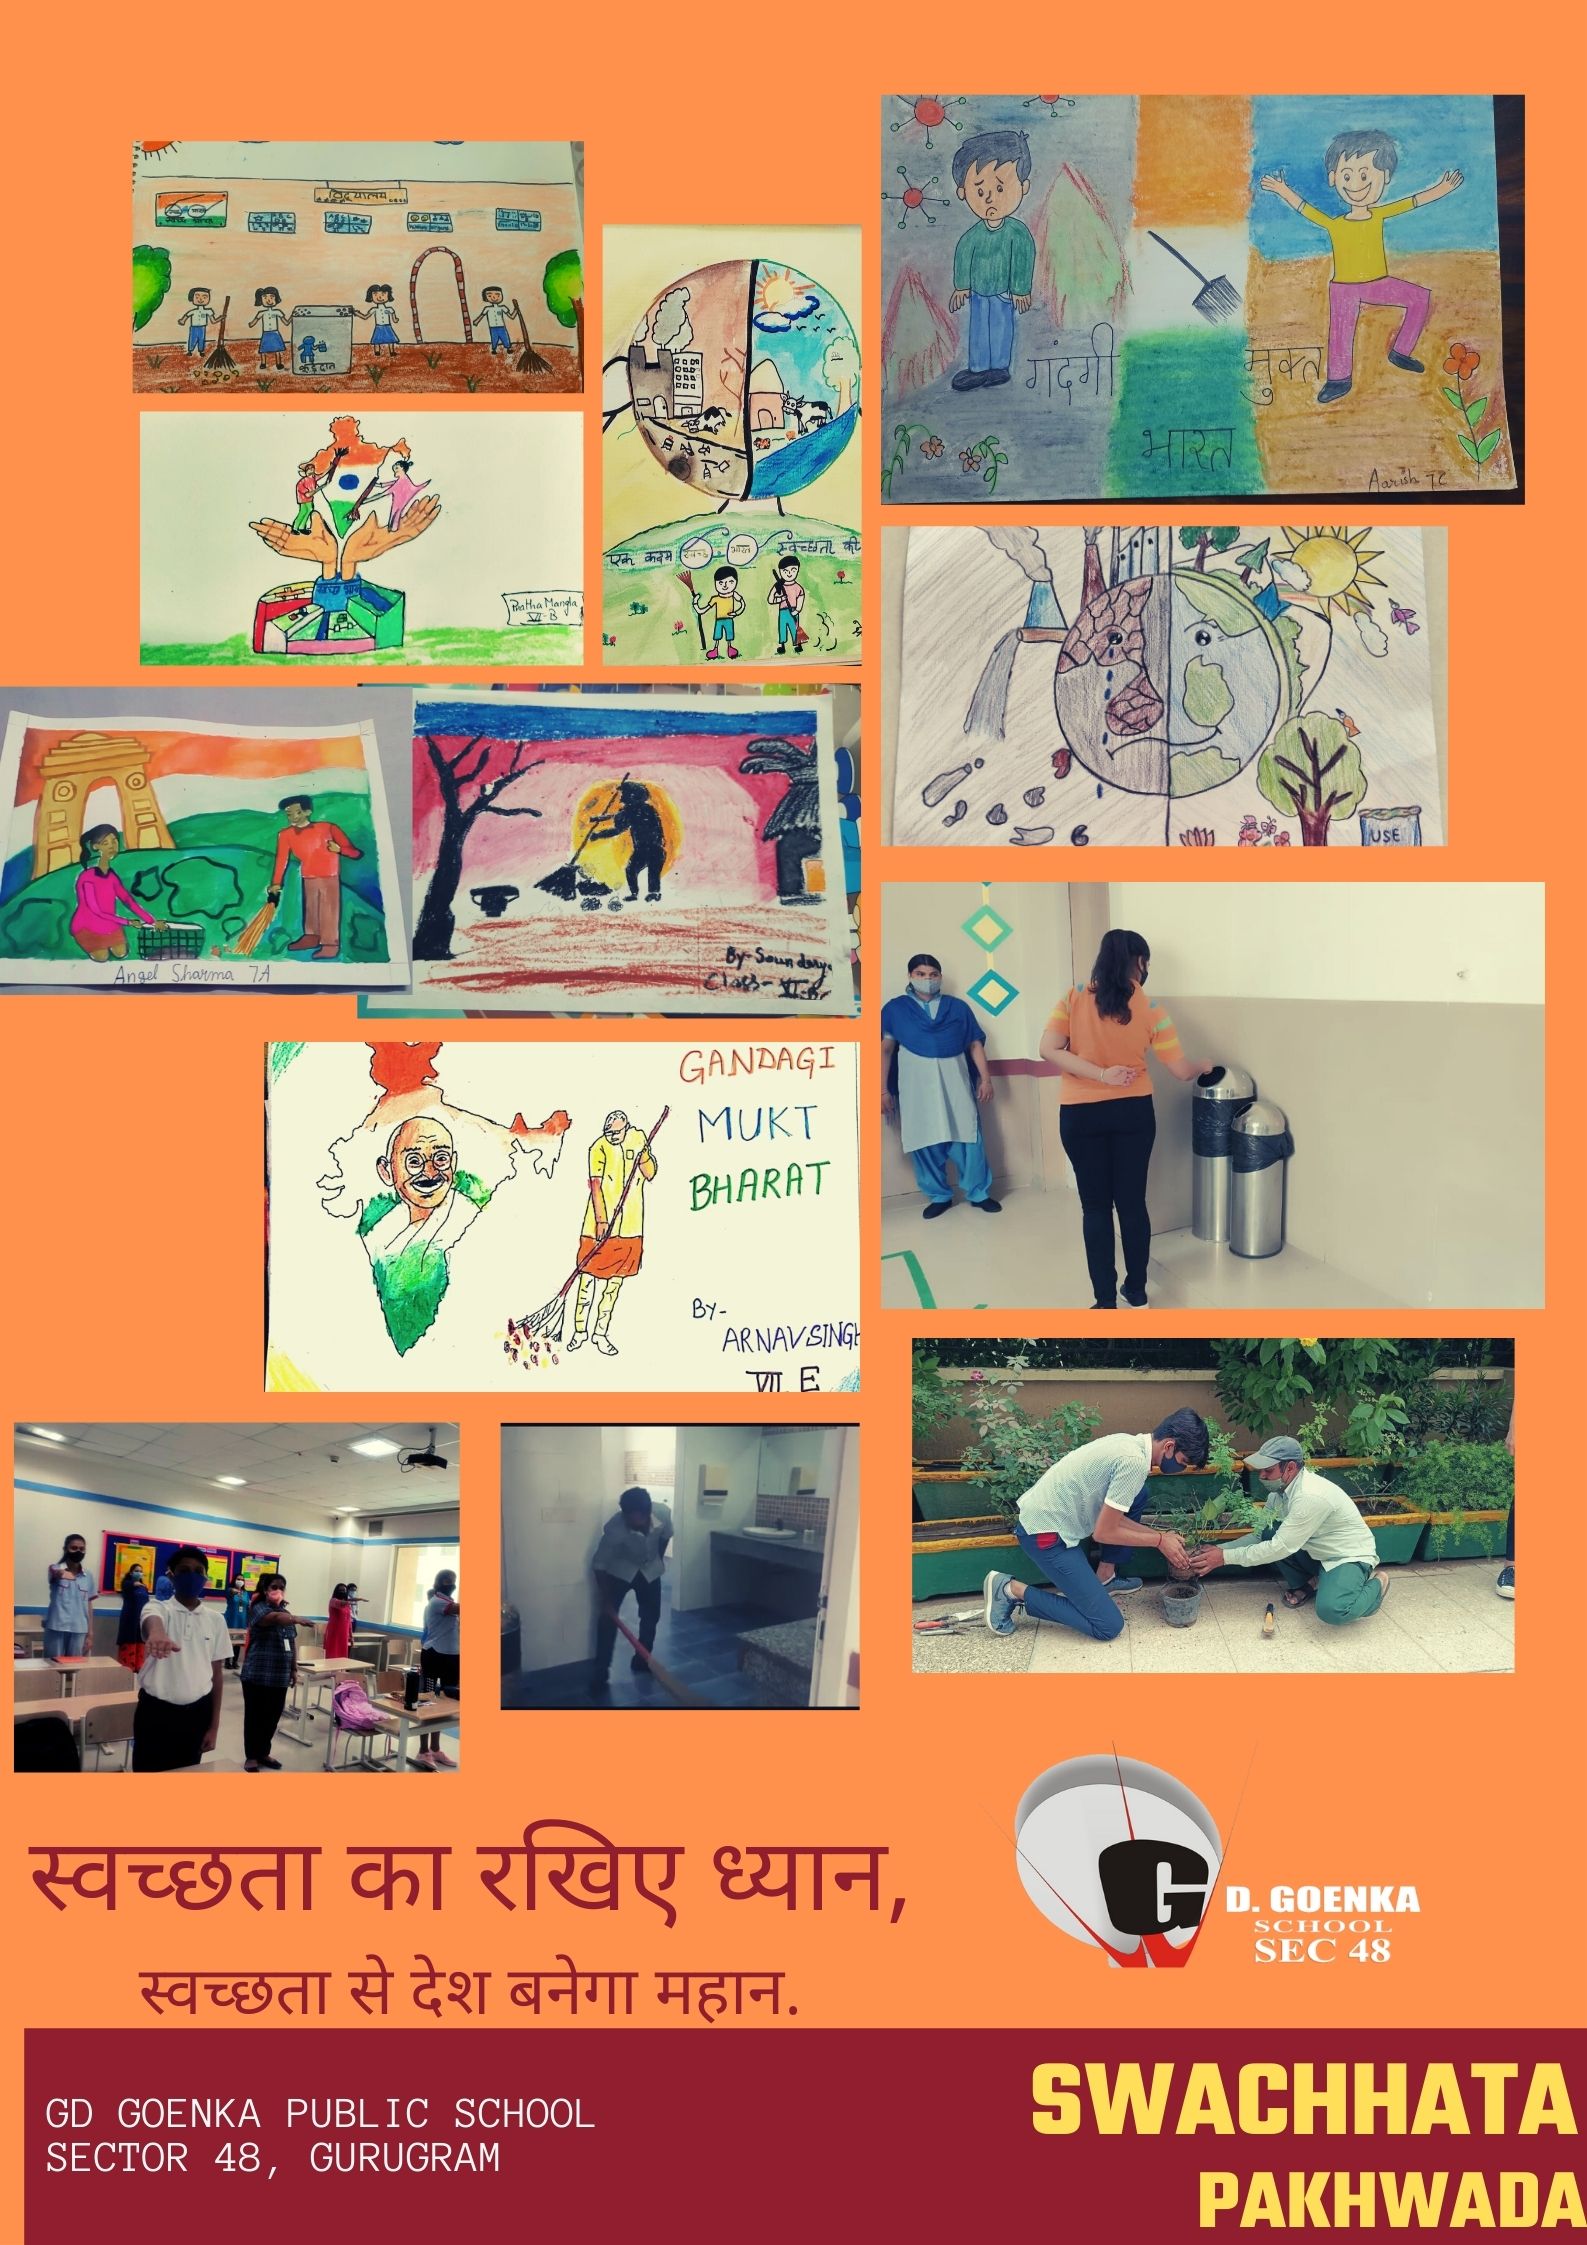 Made by my Student Nikhil Kumar | Word art drawings, Poster drawing, India  poster